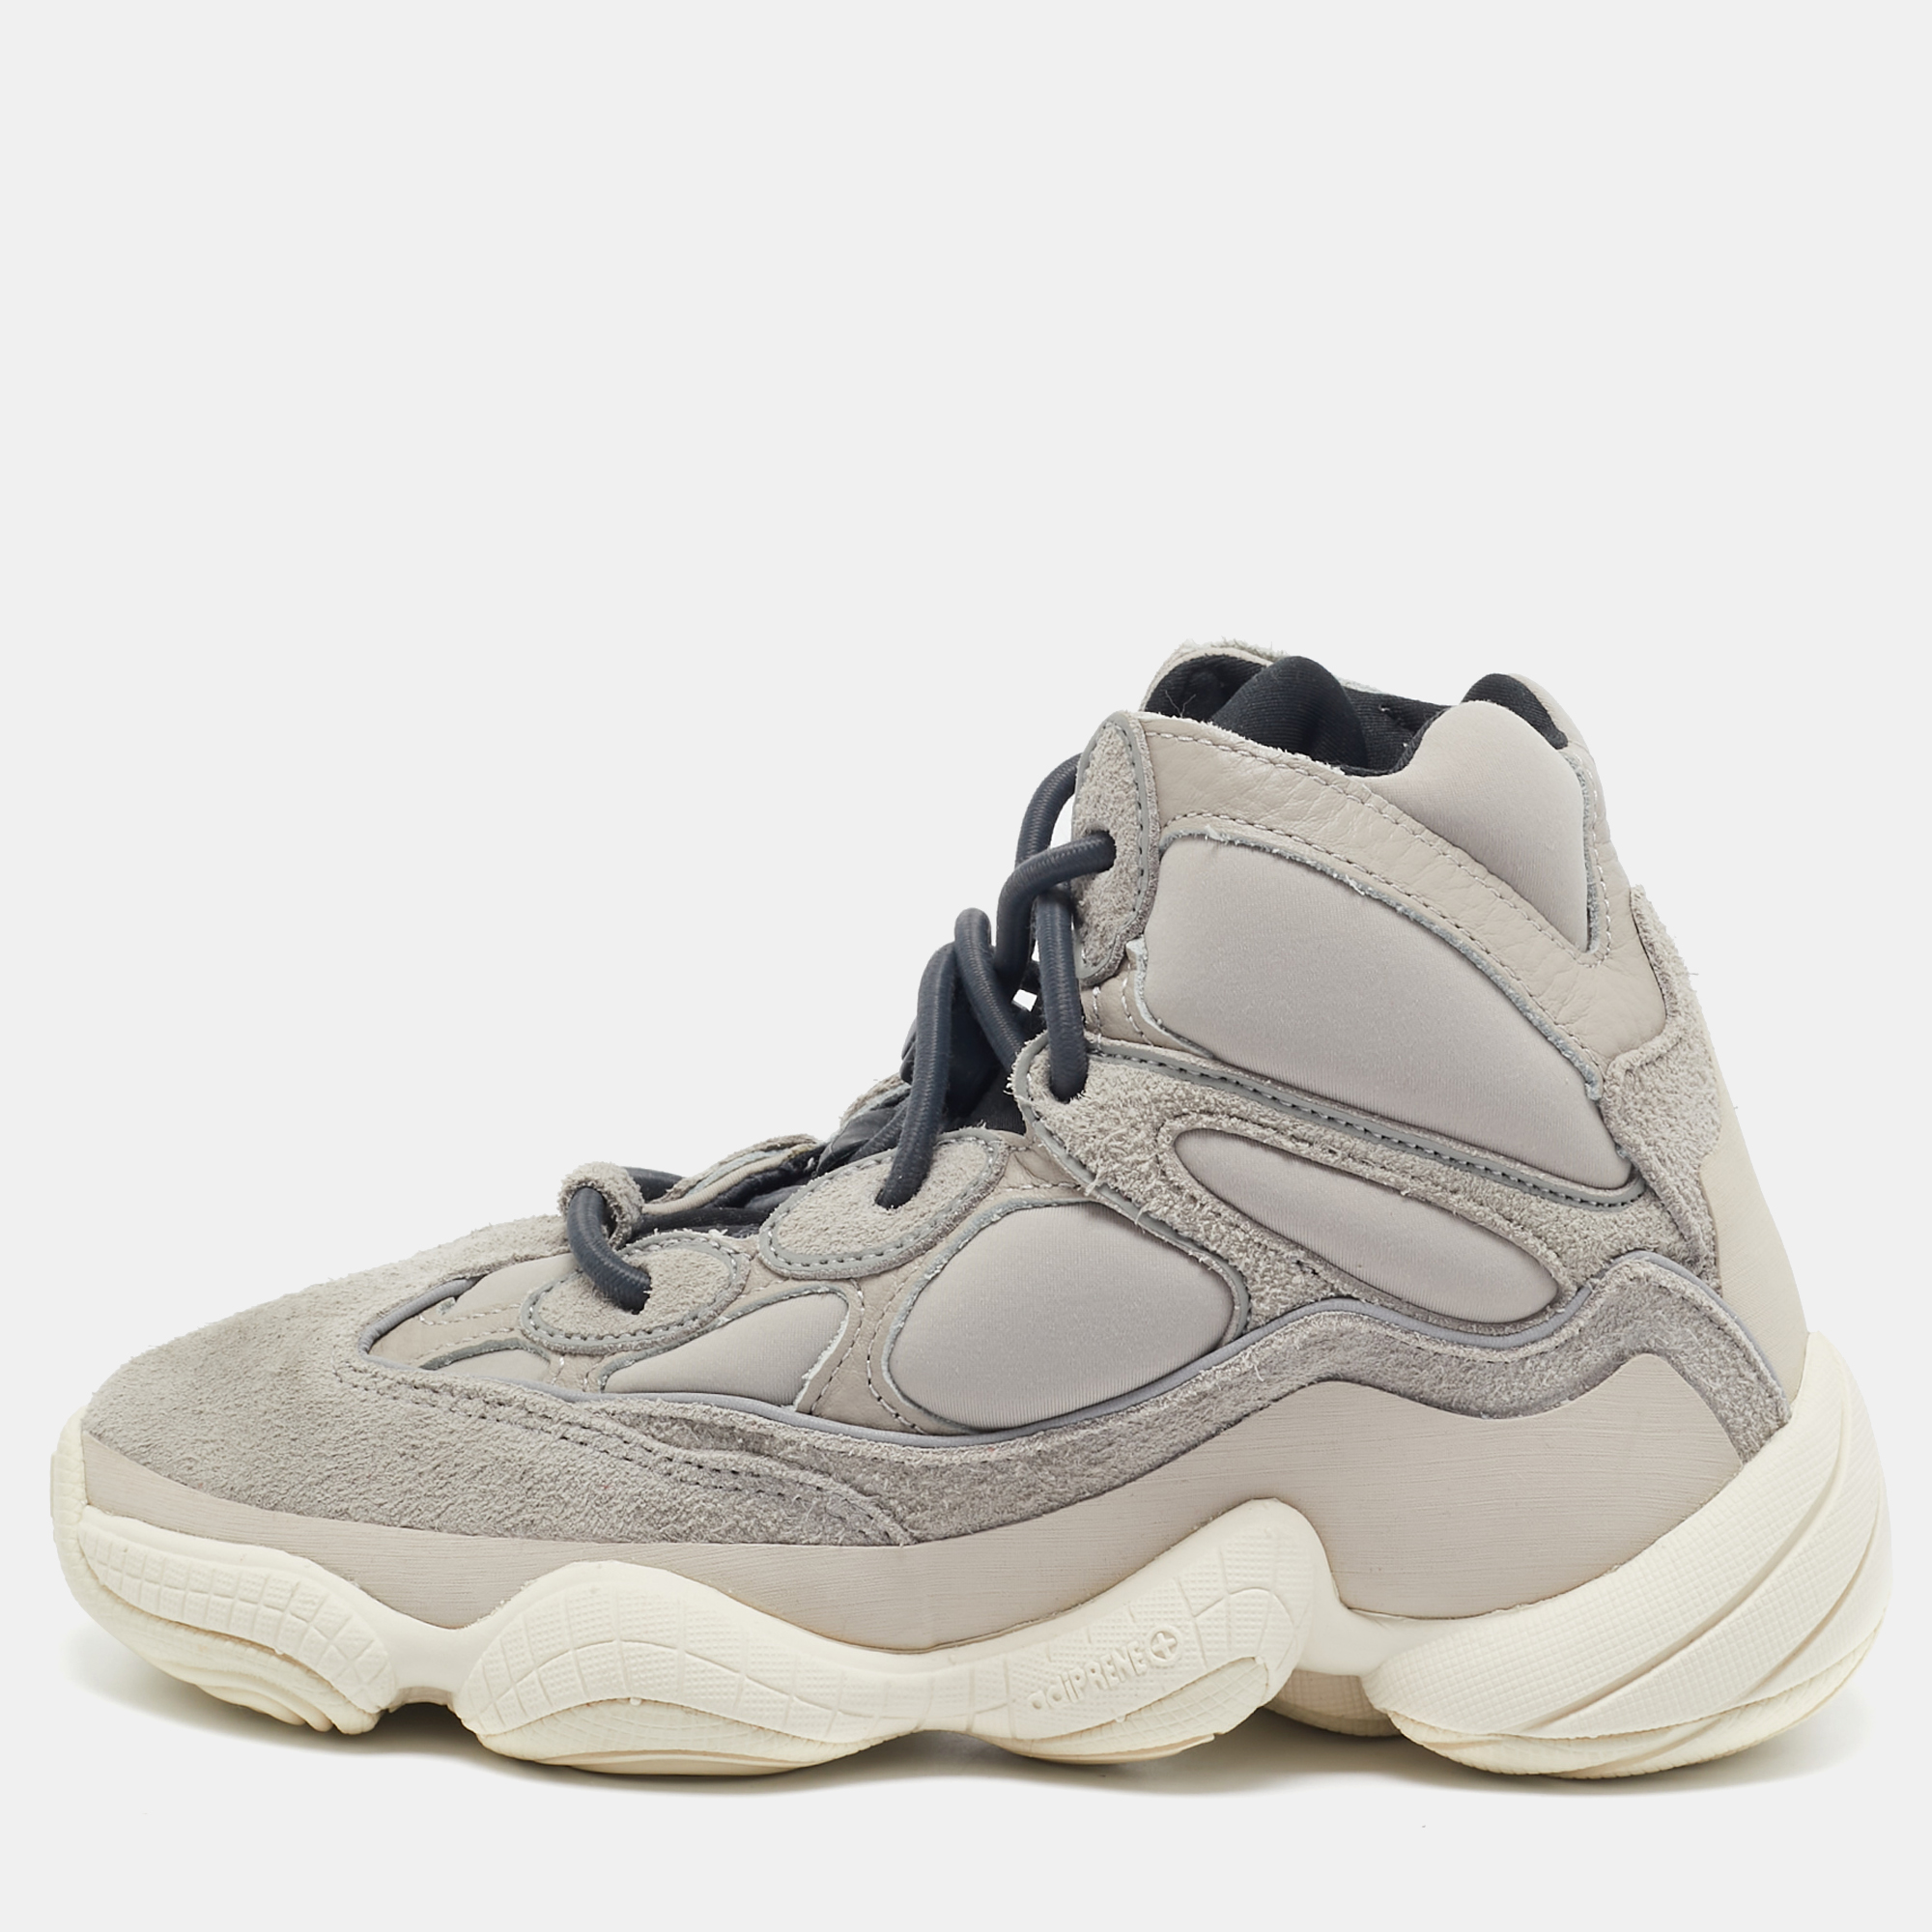 

Yeezy x Adidas Grey Suede and Leather Yeezy 500 Sneakers Size